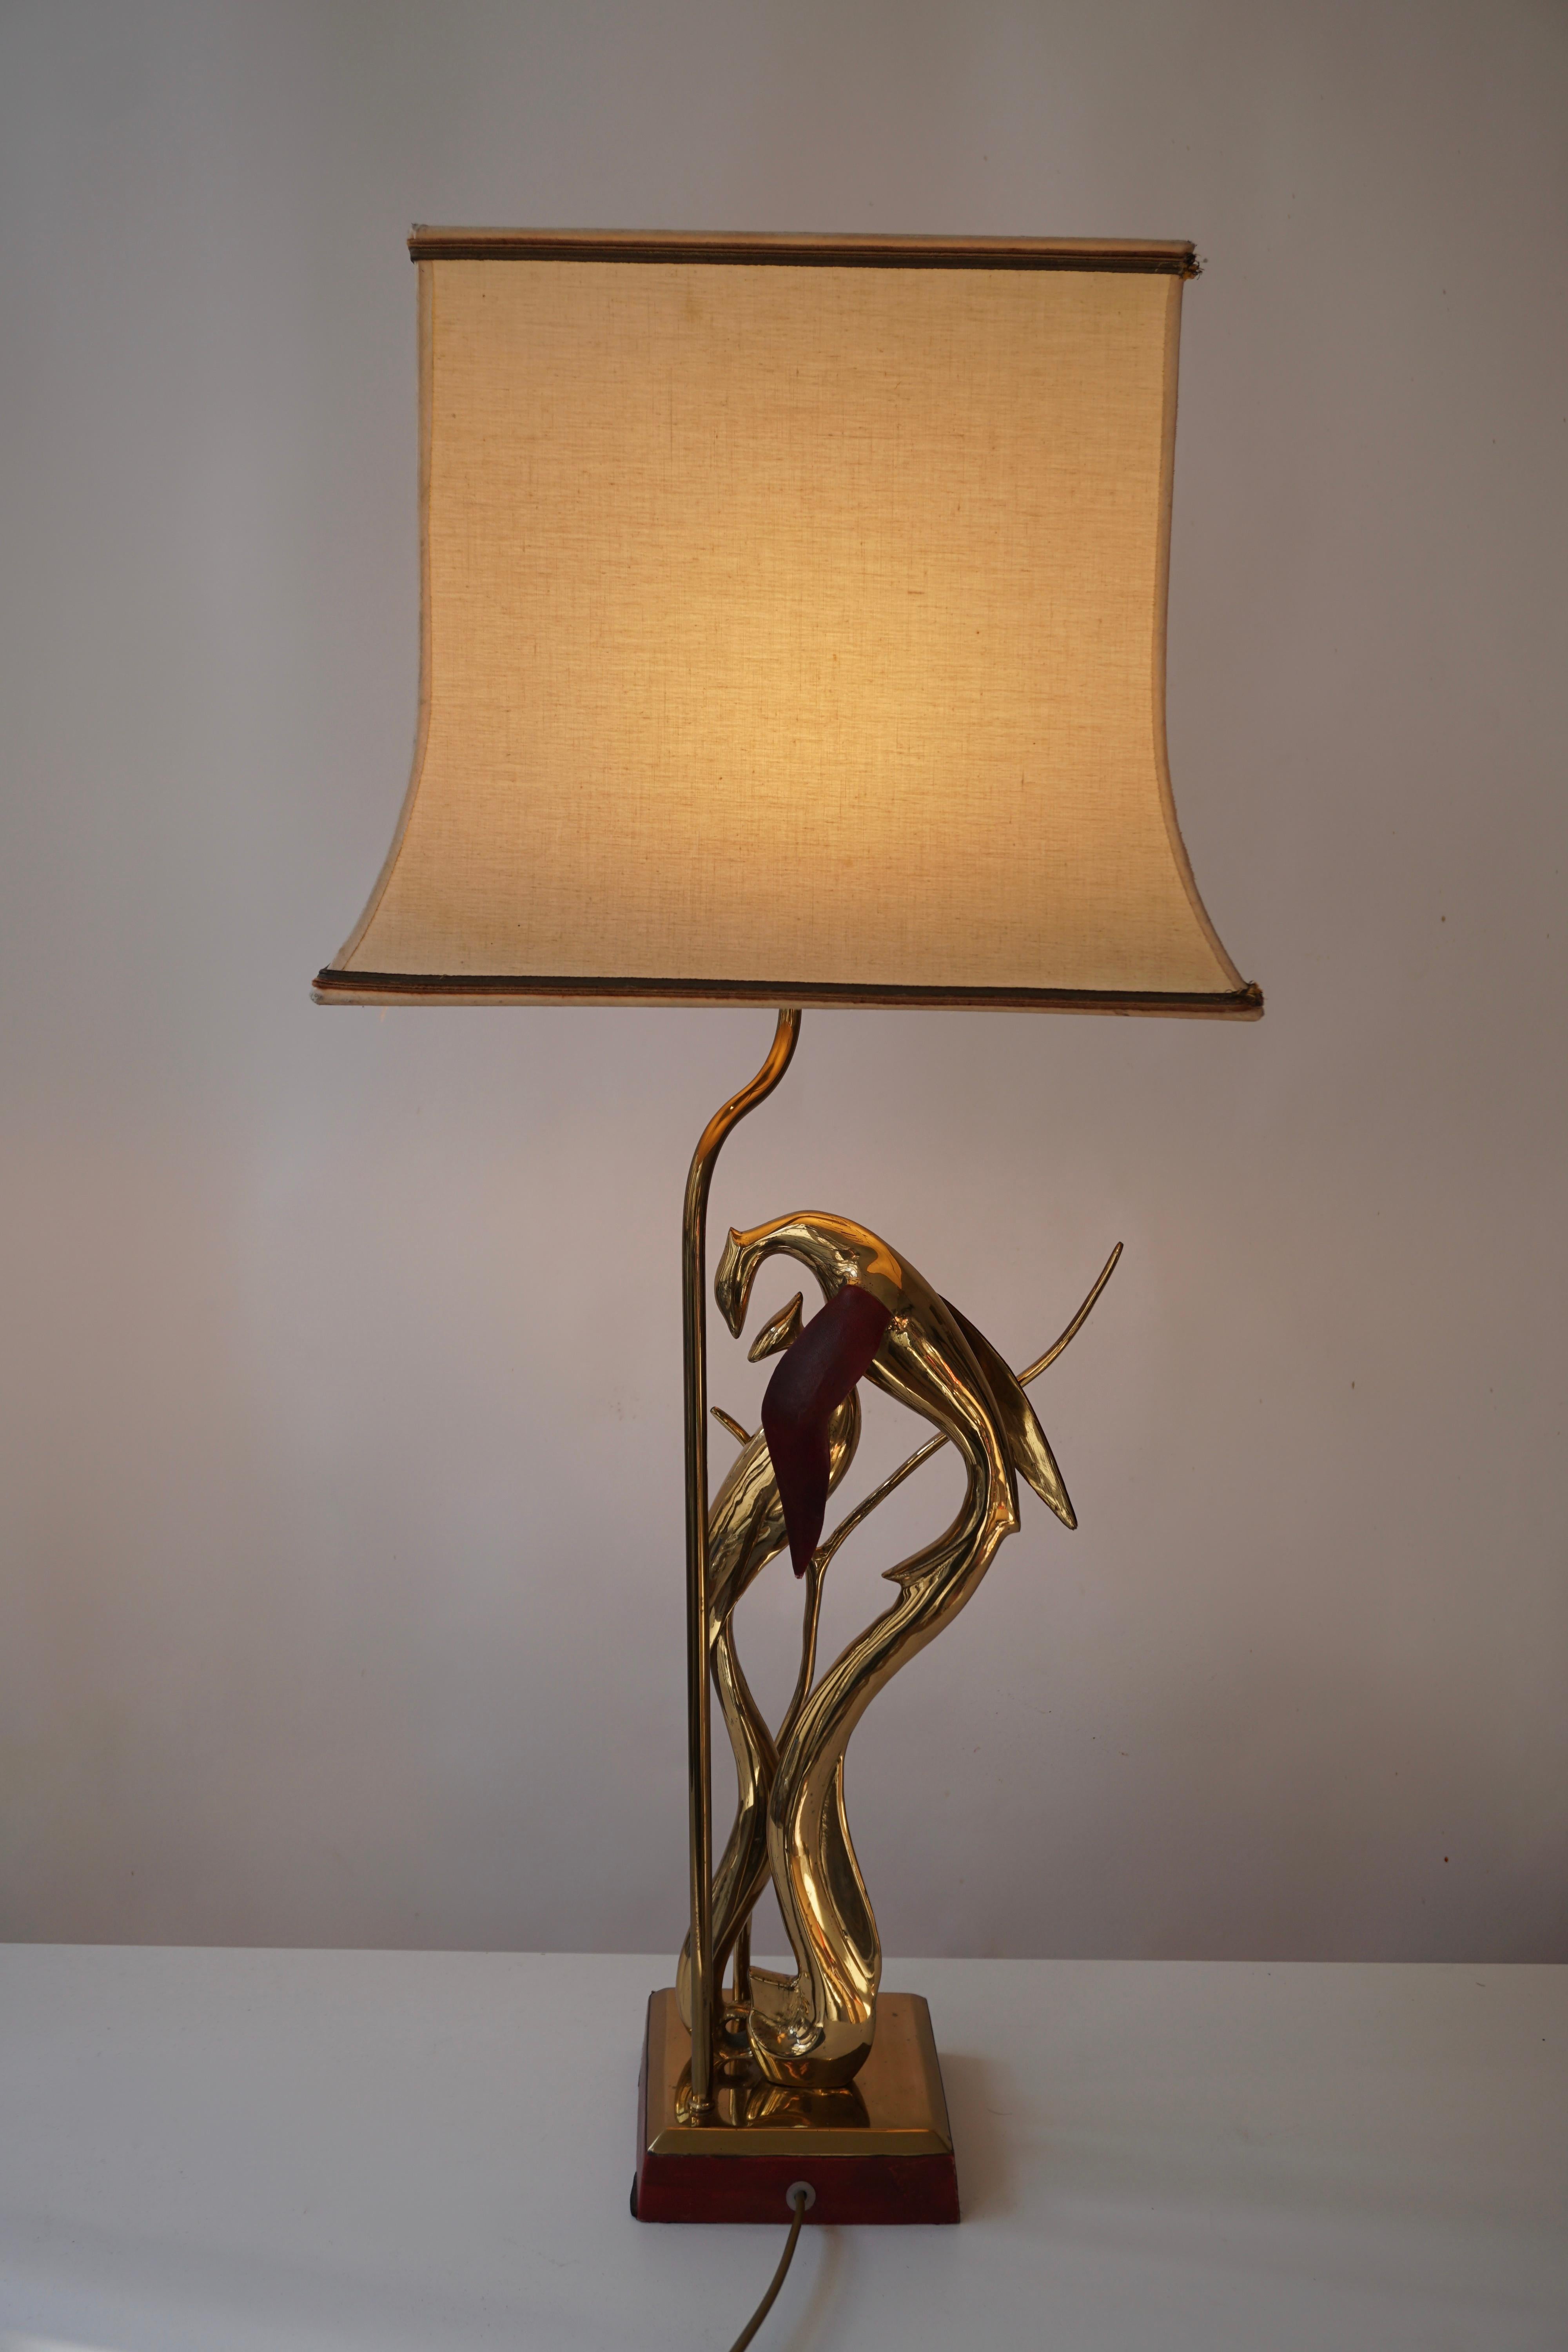 Sculptural Table Lamp with Birds in Brass and Leather, 1970s For Sale 2